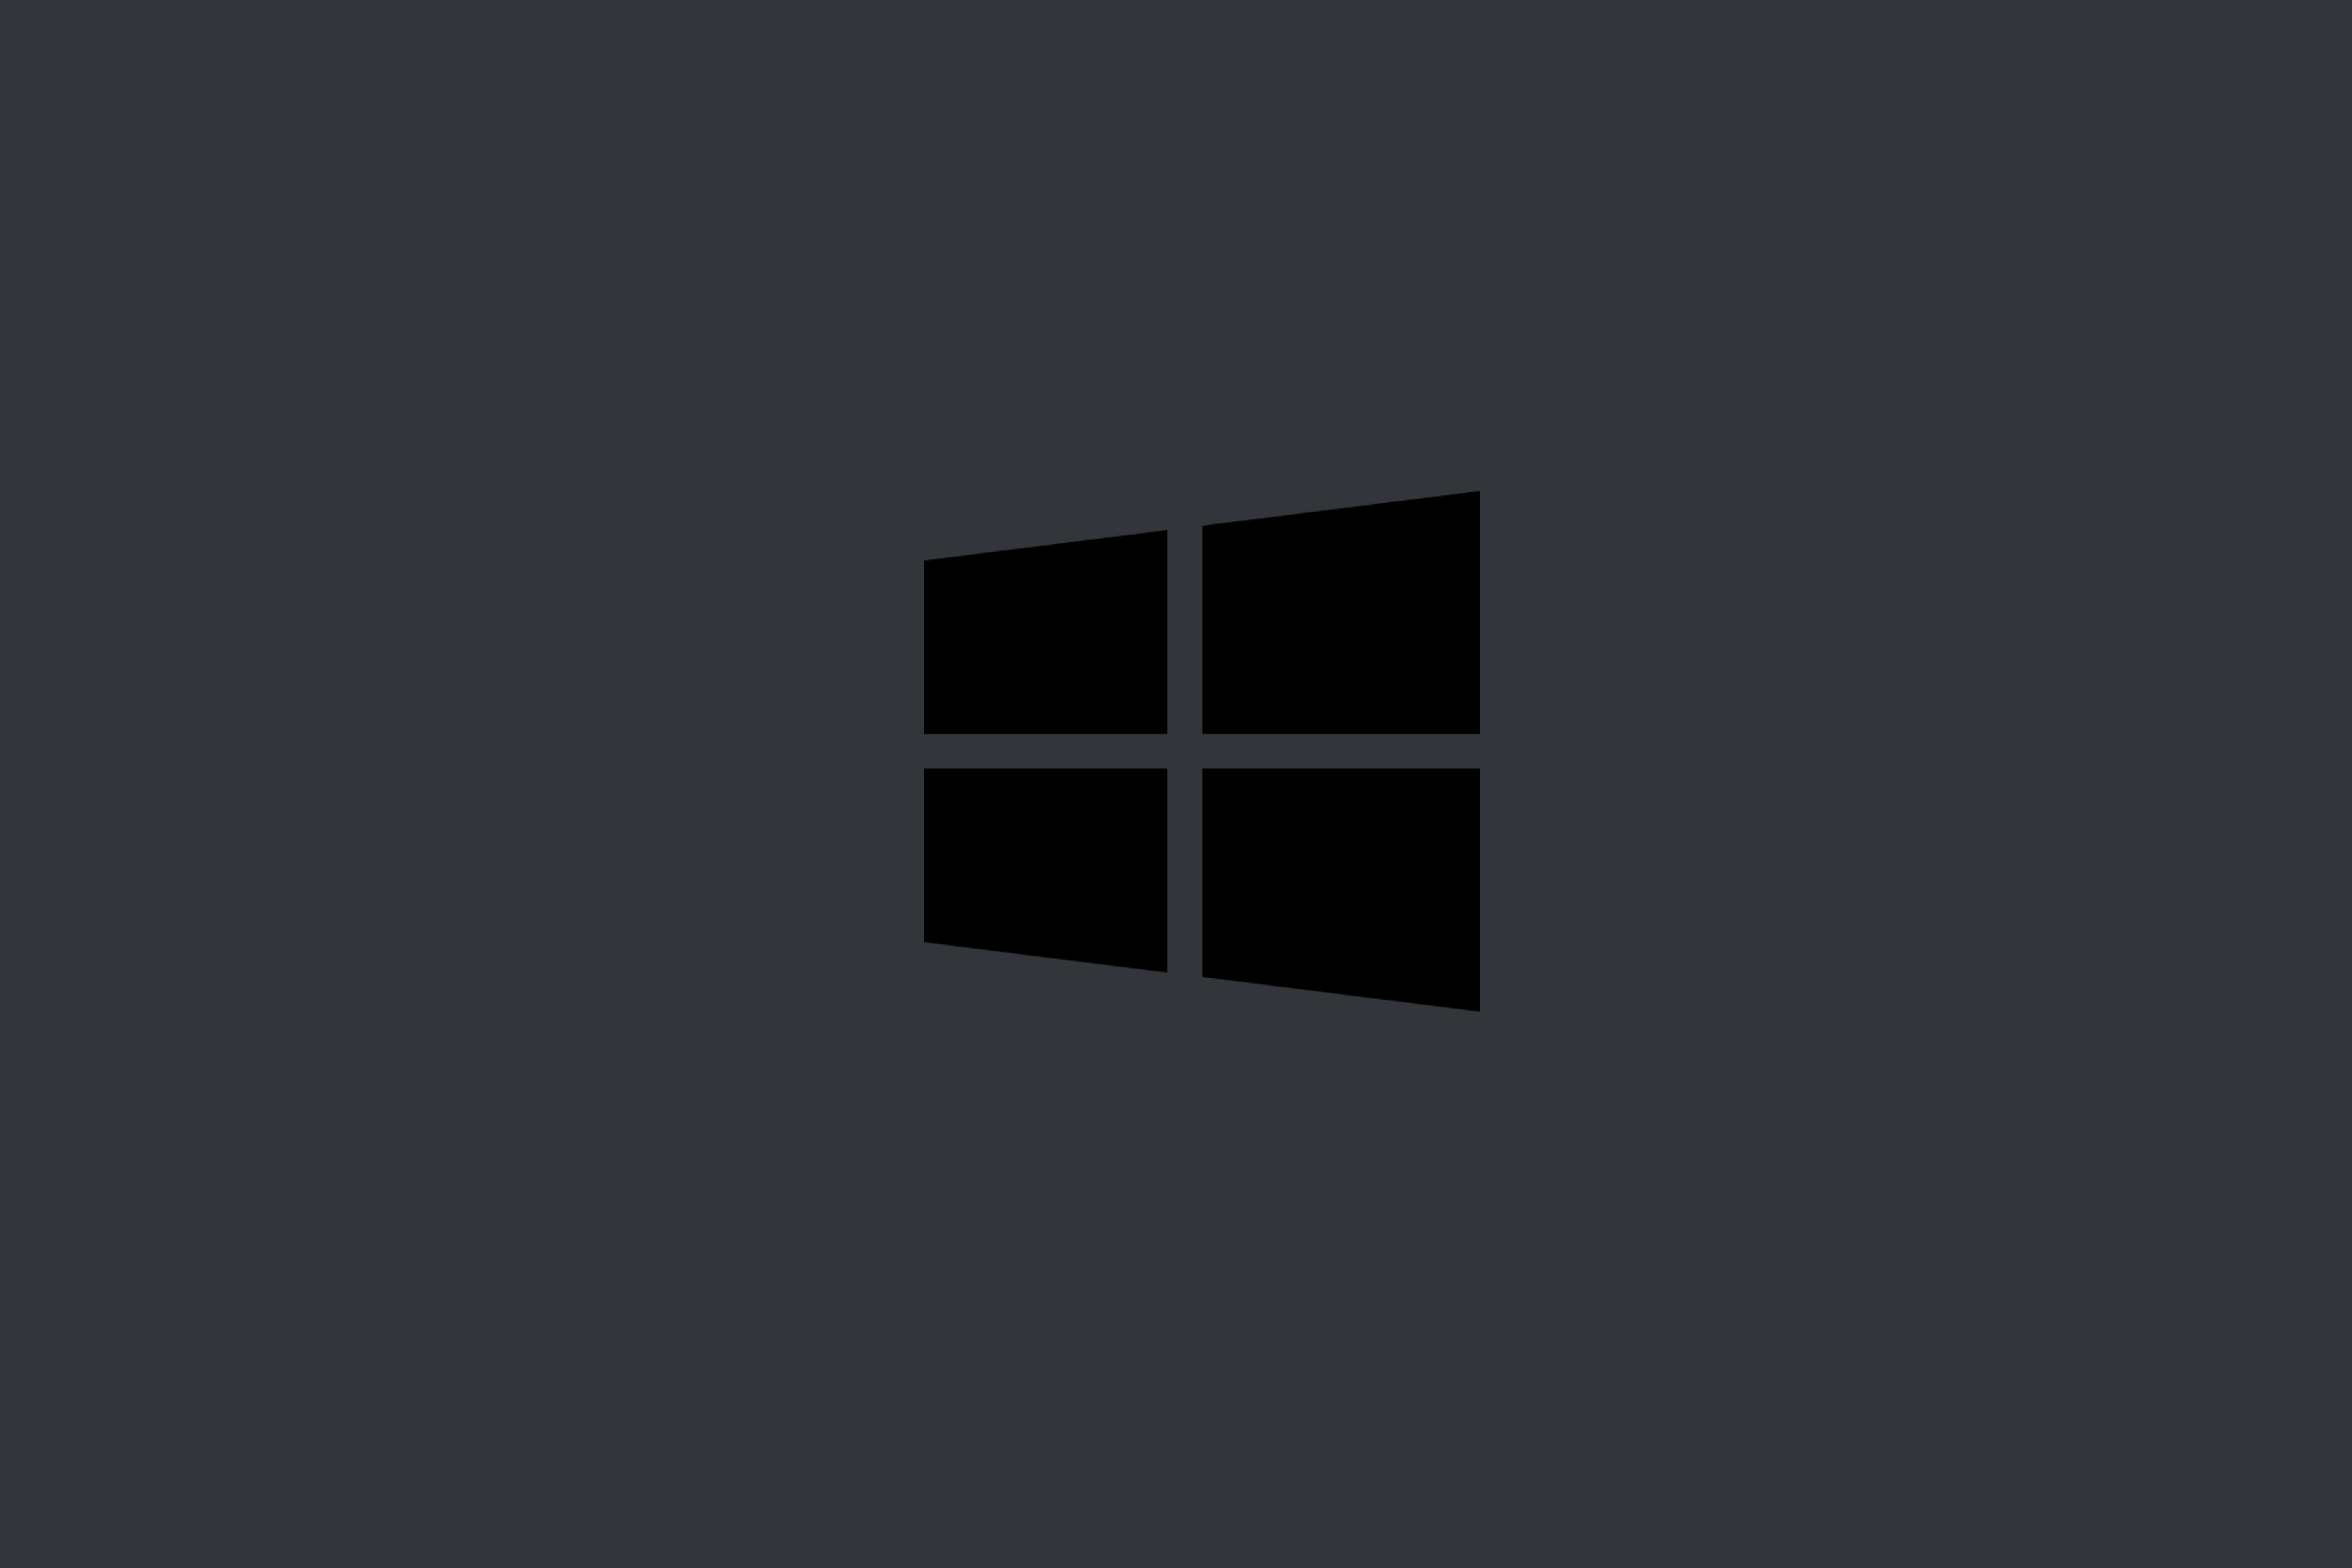 Basic Commands For Windows CMD